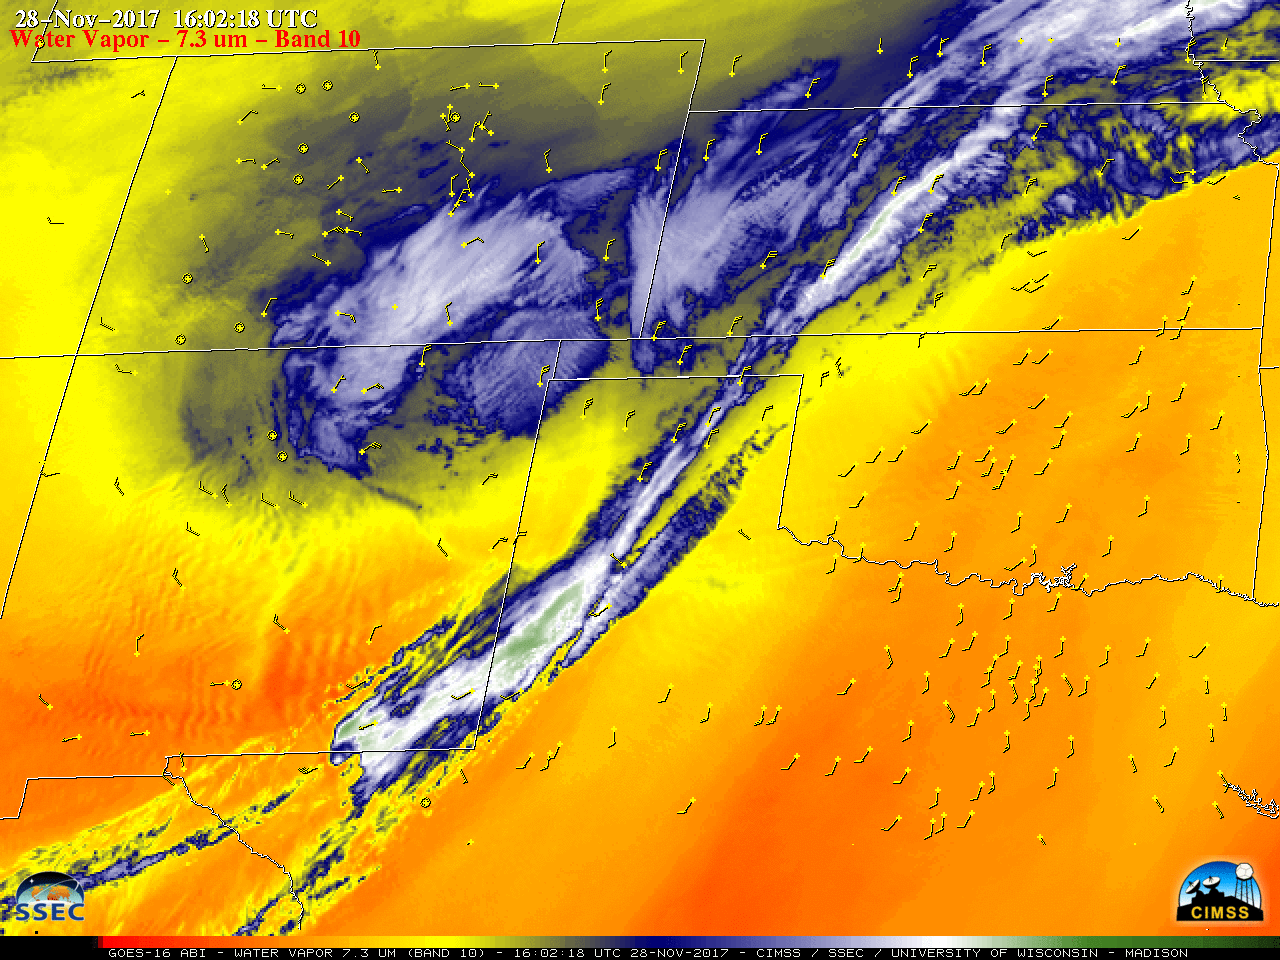 GOES-16 Lower-level (7.3 µm) images, with hourly surface wind barbs plotted in yellow [click to play MP4 animation]